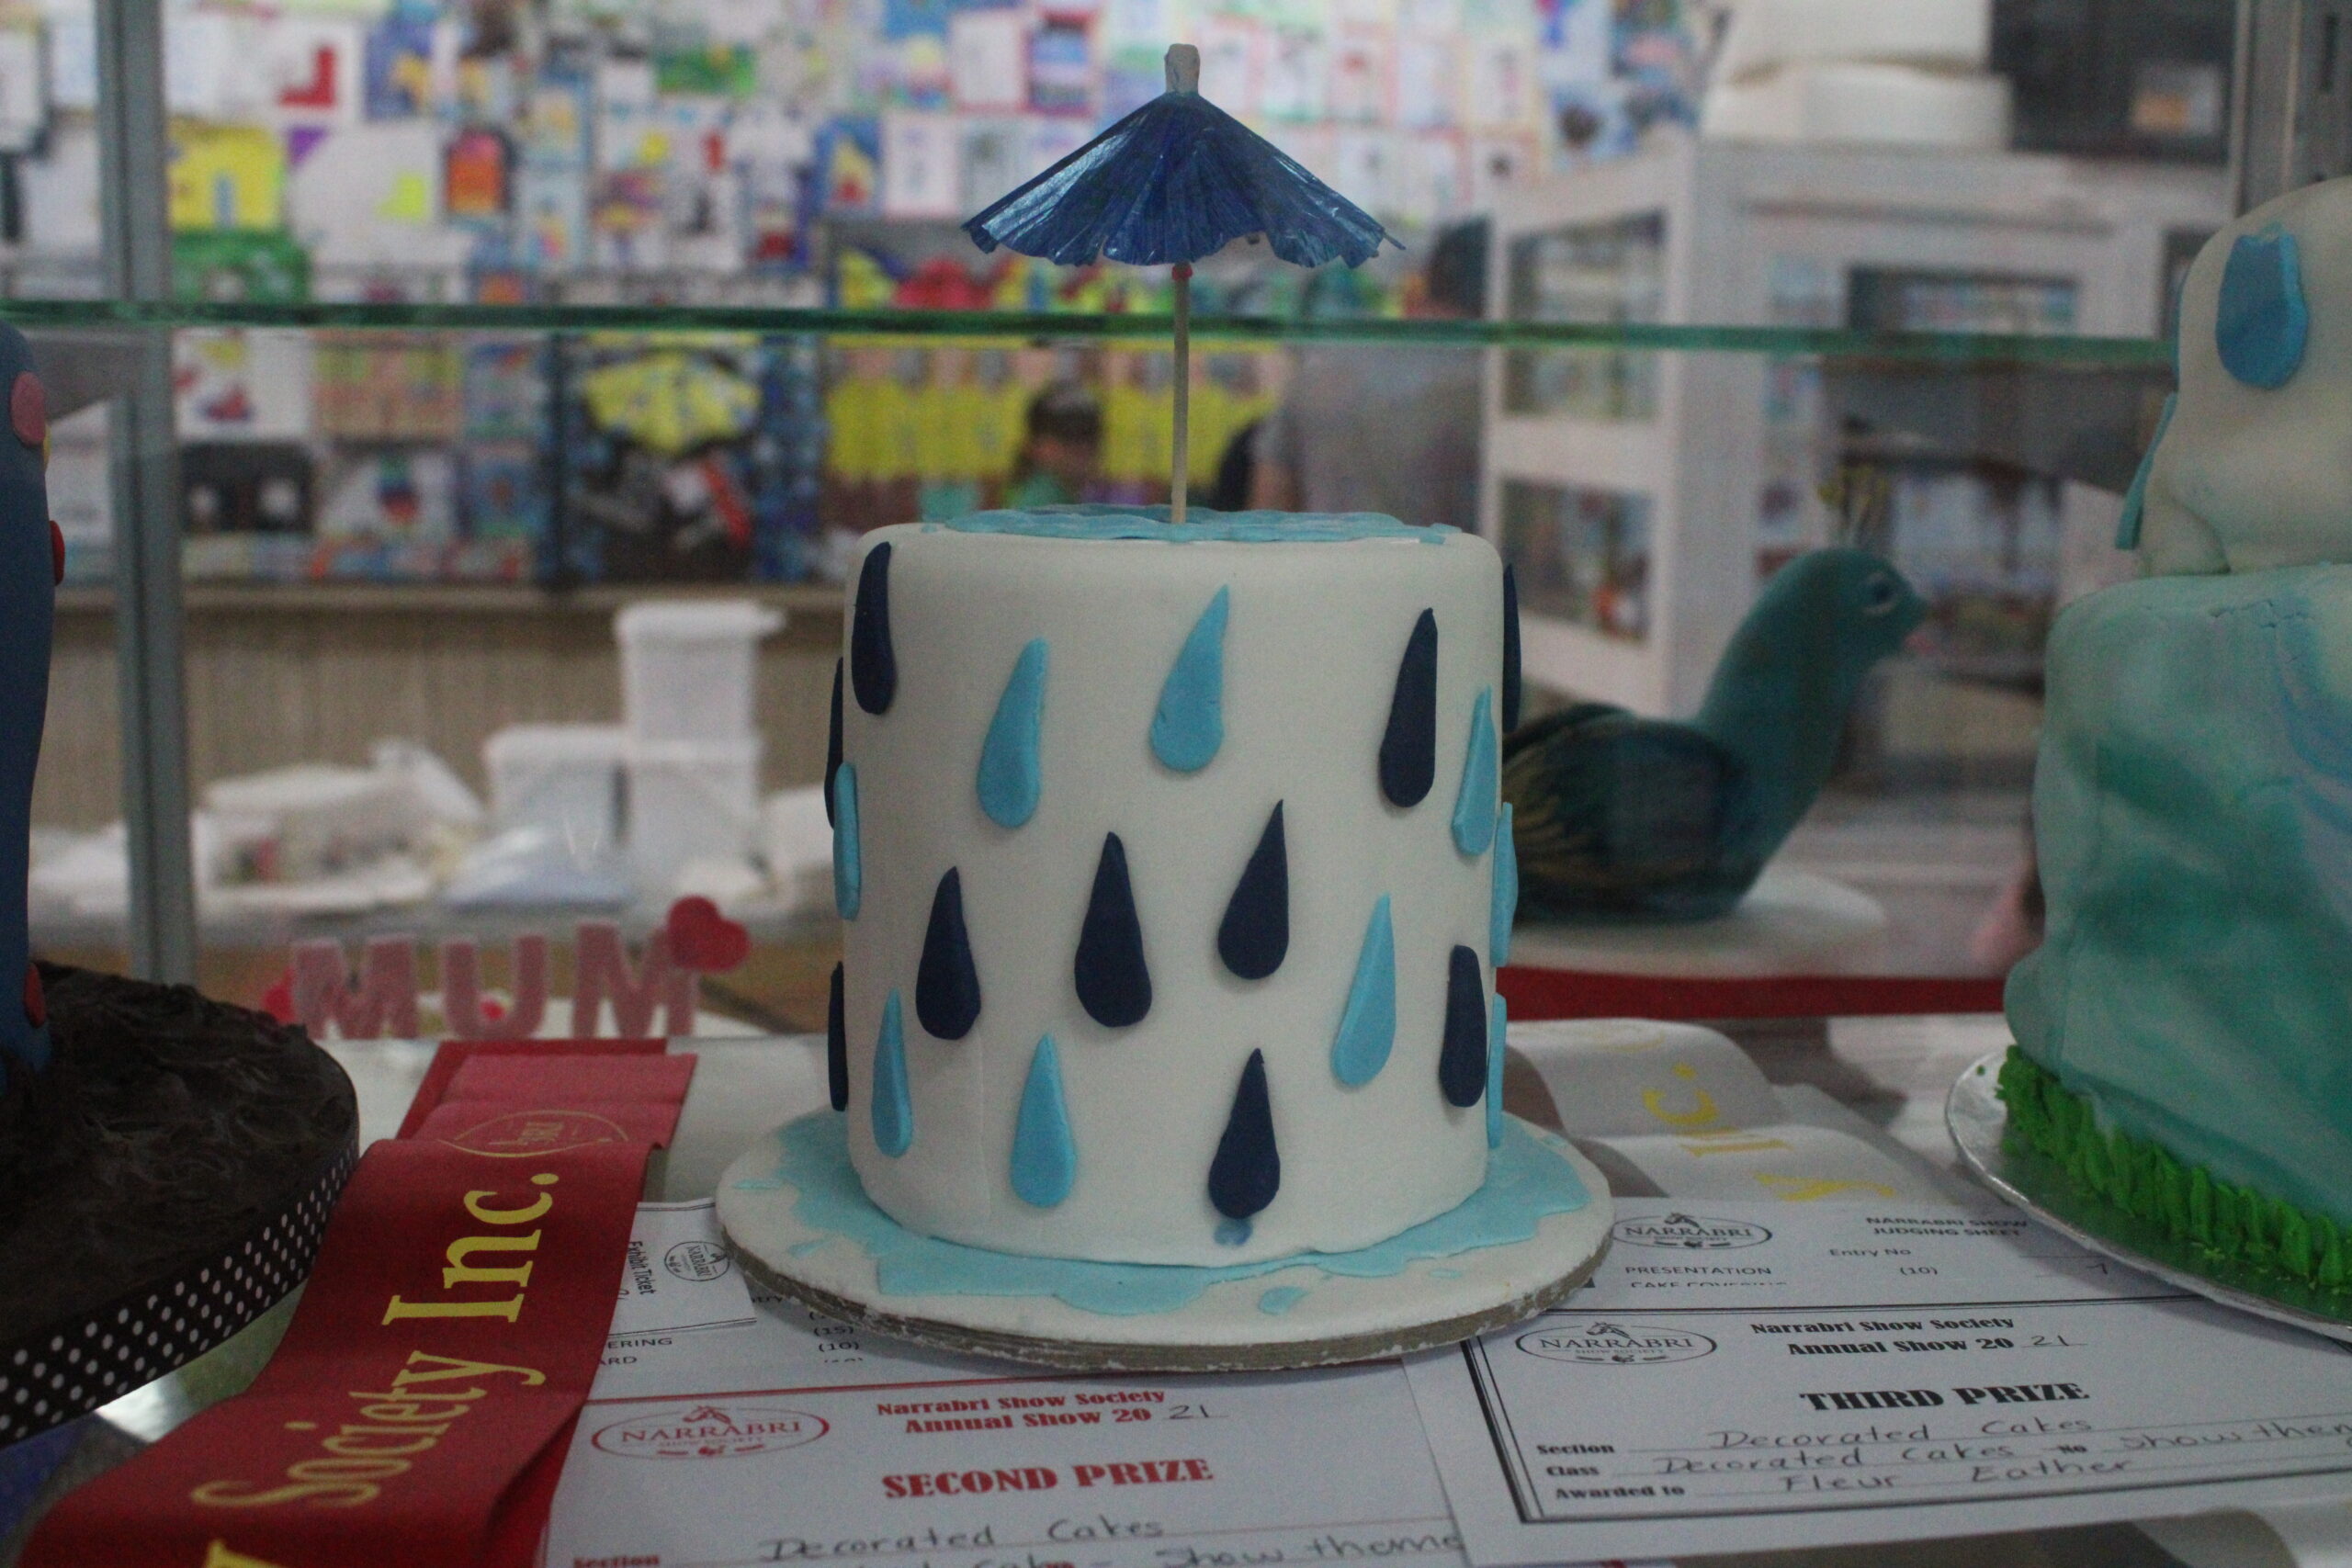 Georgia Herden was awarded second prize for this decorated cake.